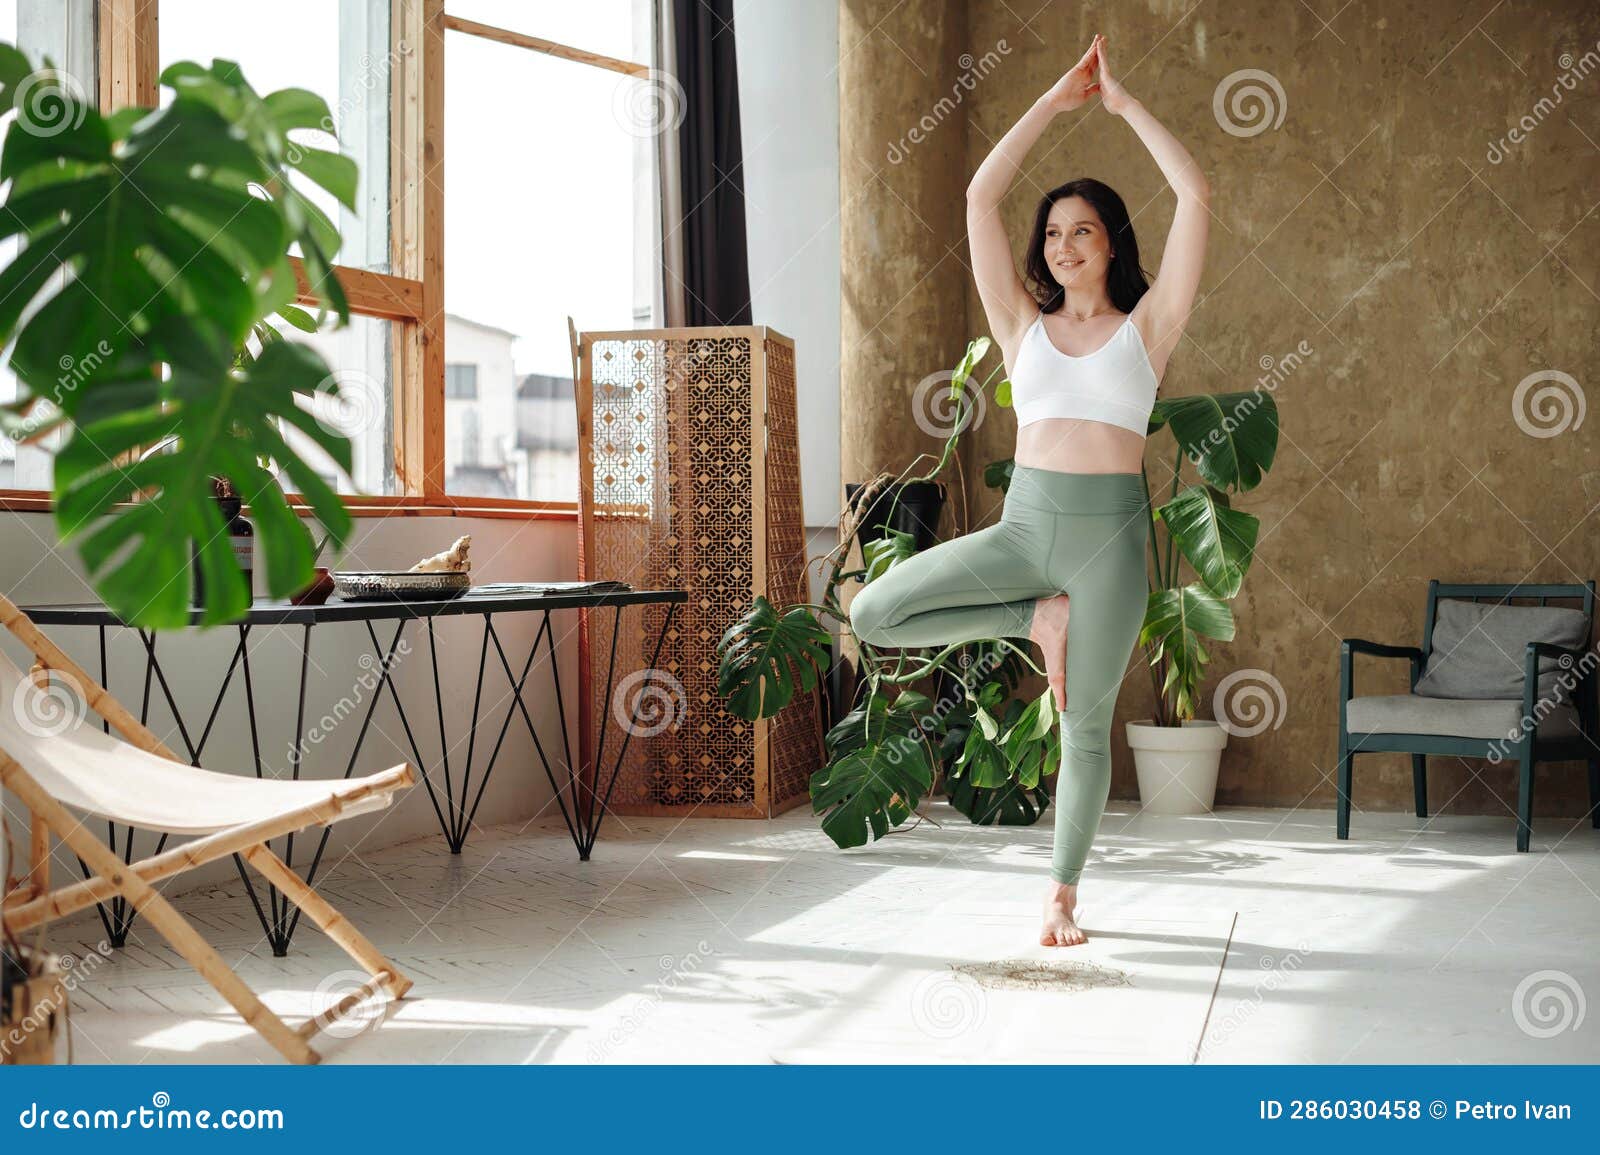 Fit Smiling Woman Practicing Tree Yoga Pose in Cozy Place Stock